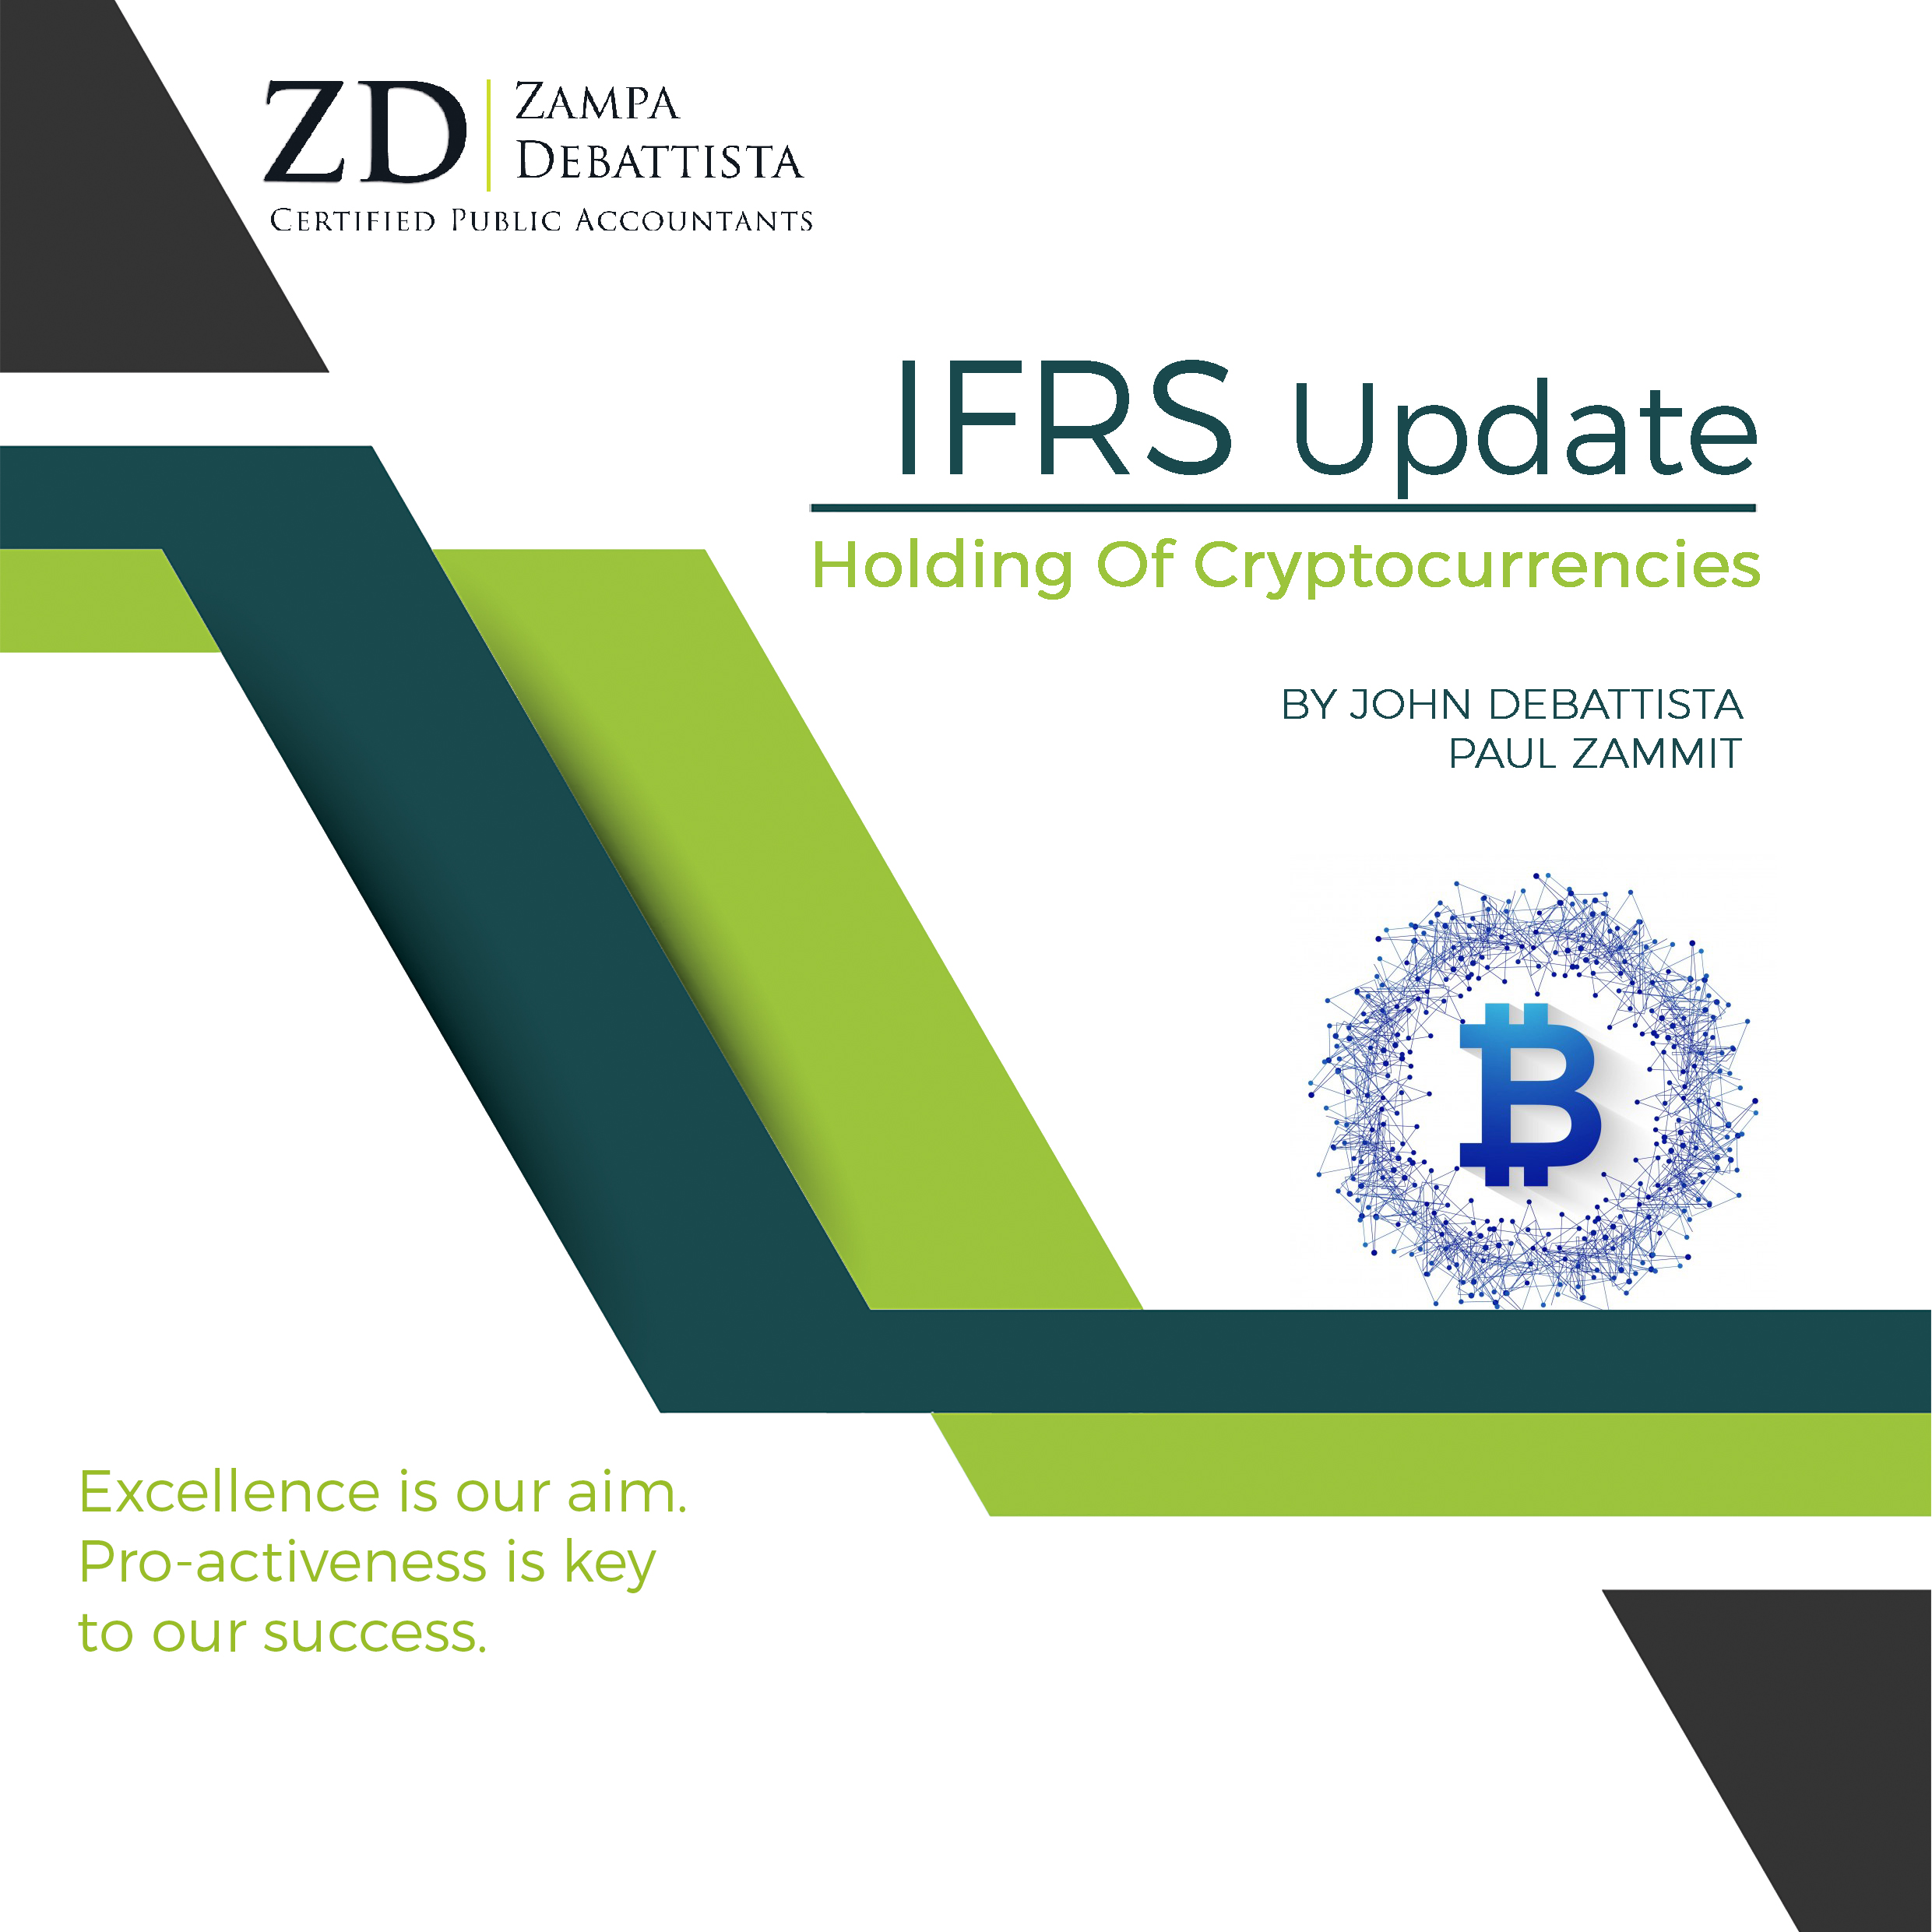 IFRS Update: Holding Of Cryptocurrencies